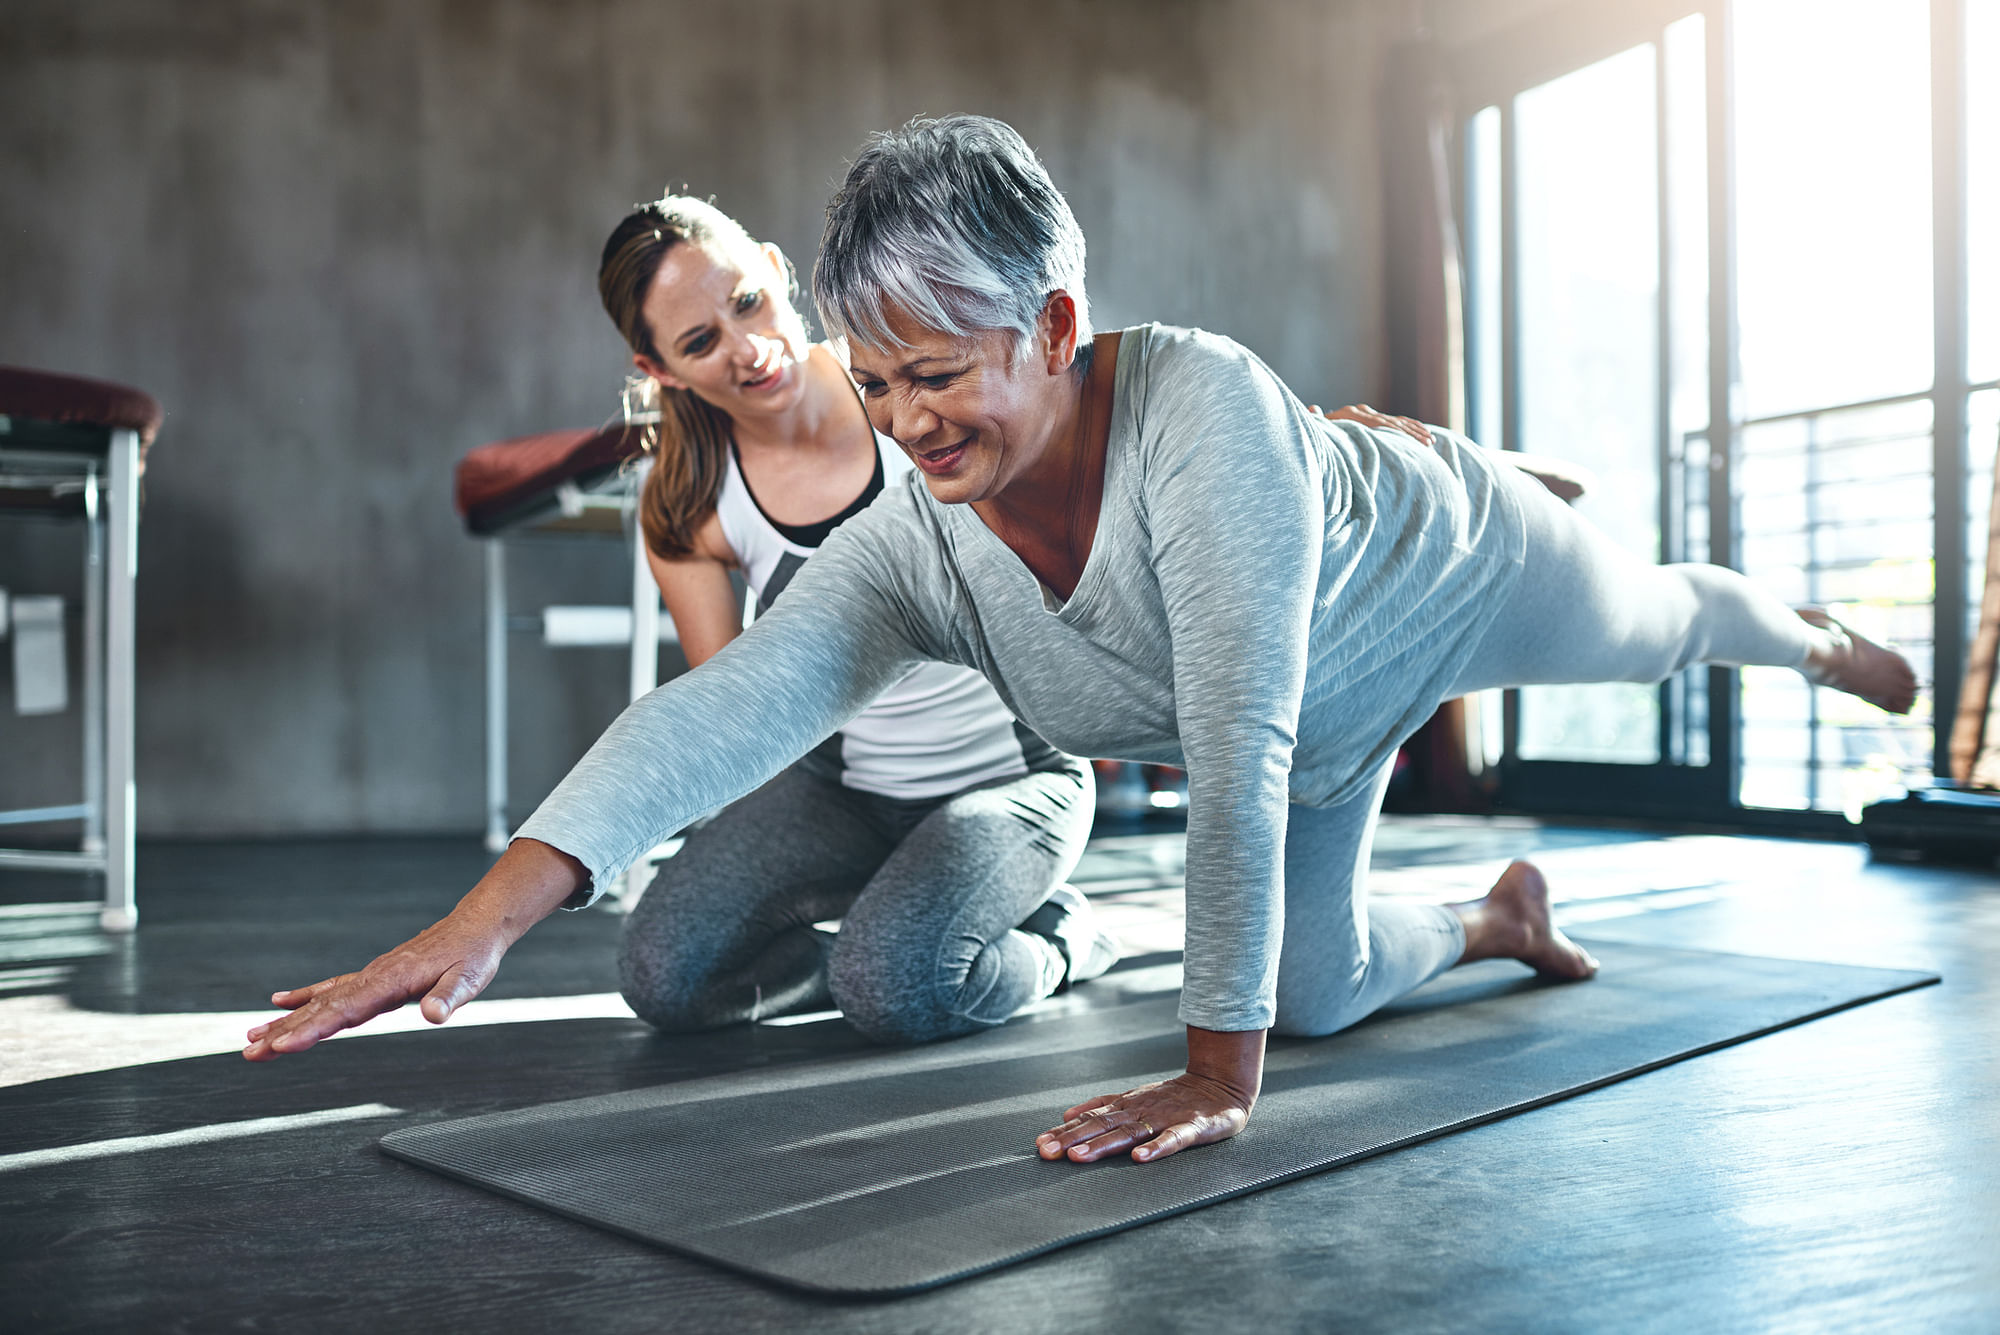 Old people who exercise regularly have muscles as fit as 25-year-olds, says study.